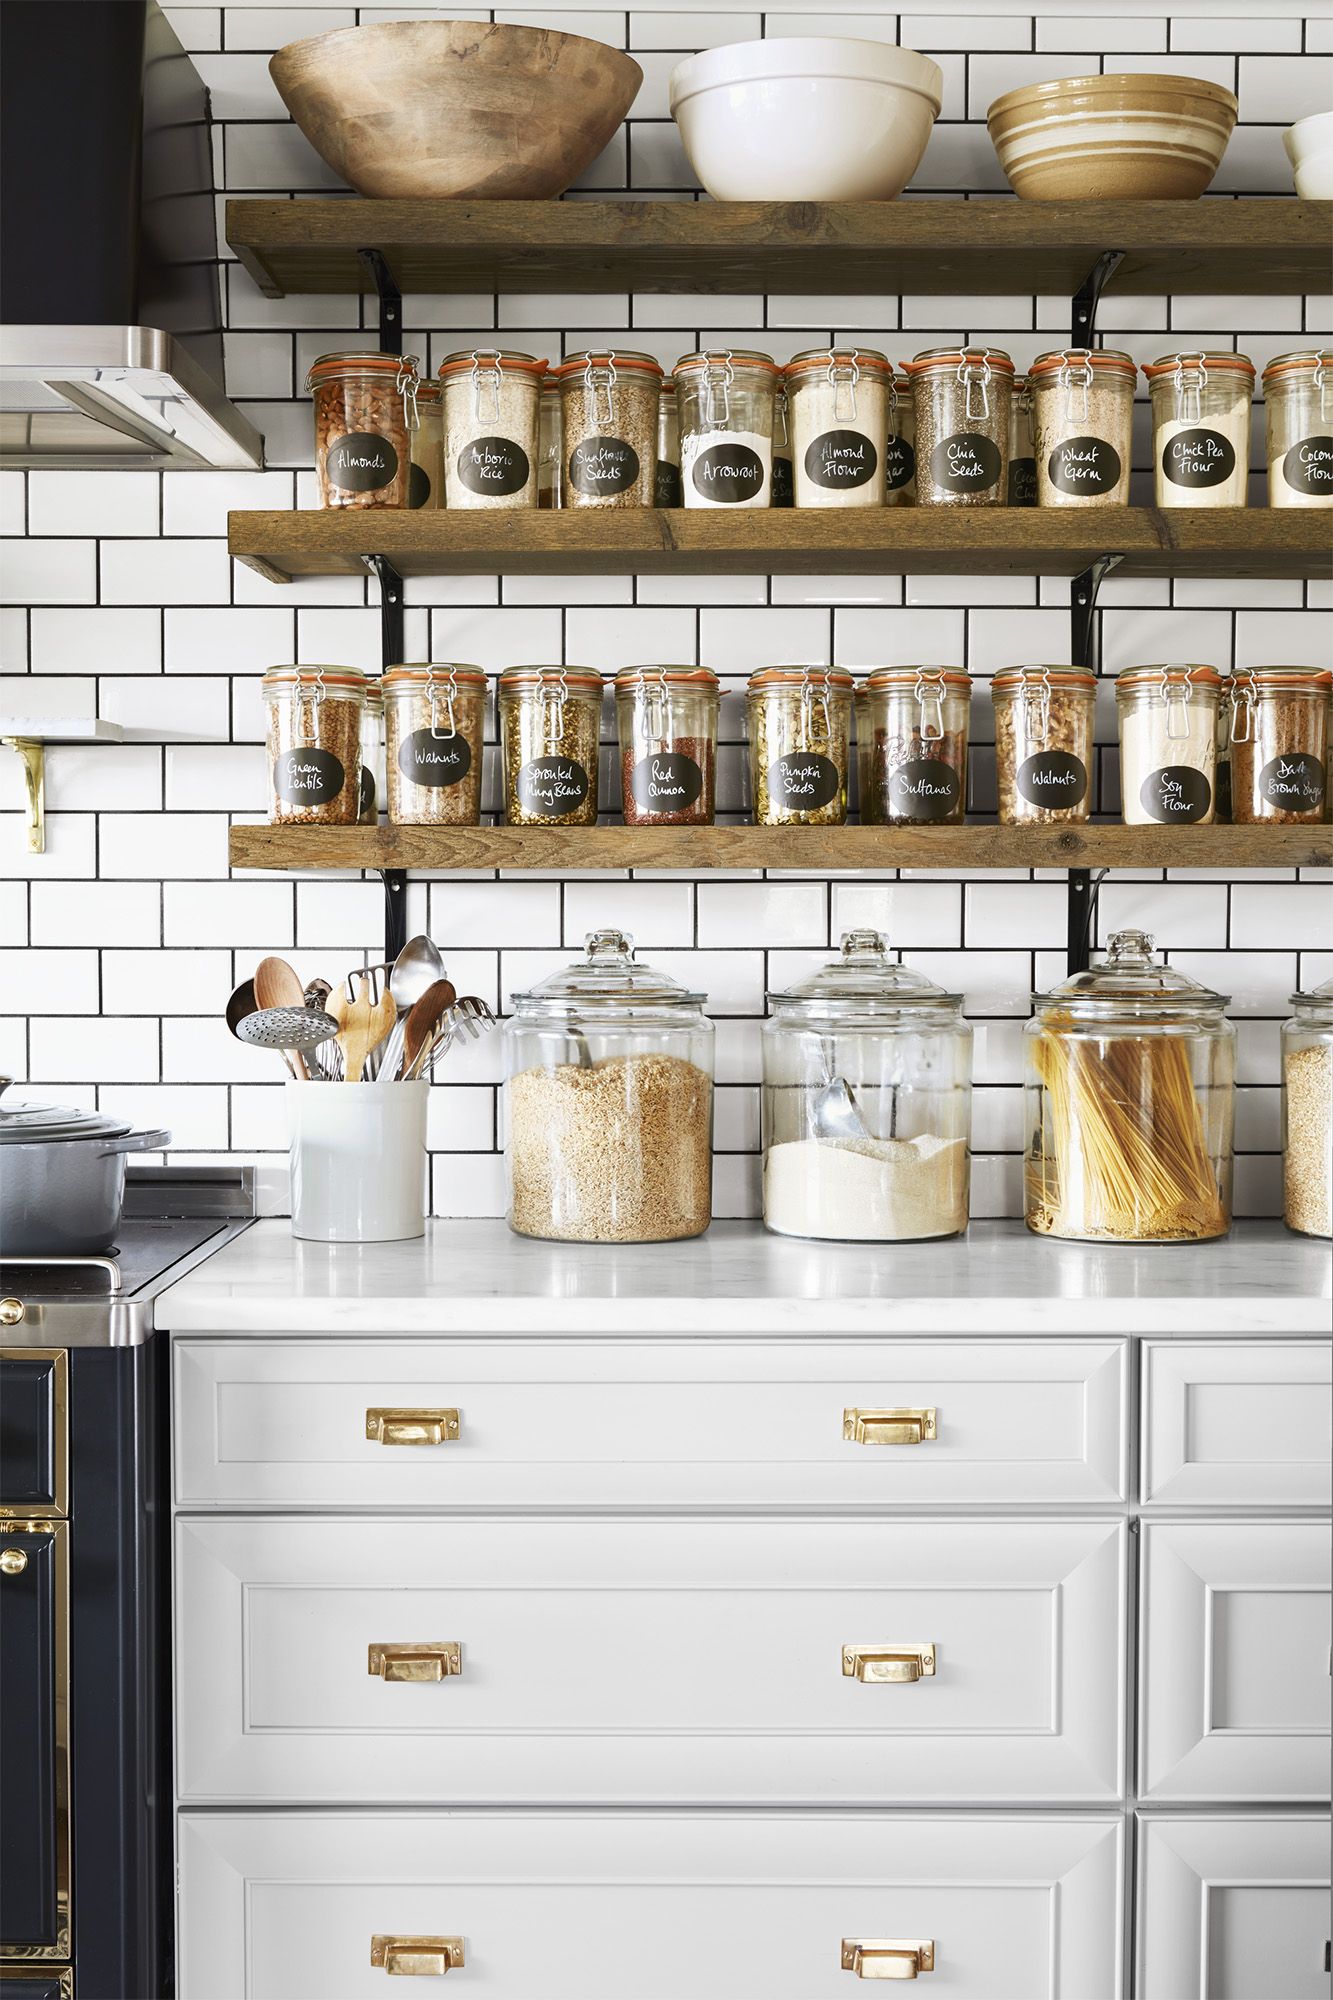 https://hips.hearstapps.com/hmg-prod/images/kitchen-organization-ideas-glass-containers-shelves-1621003221.jpg